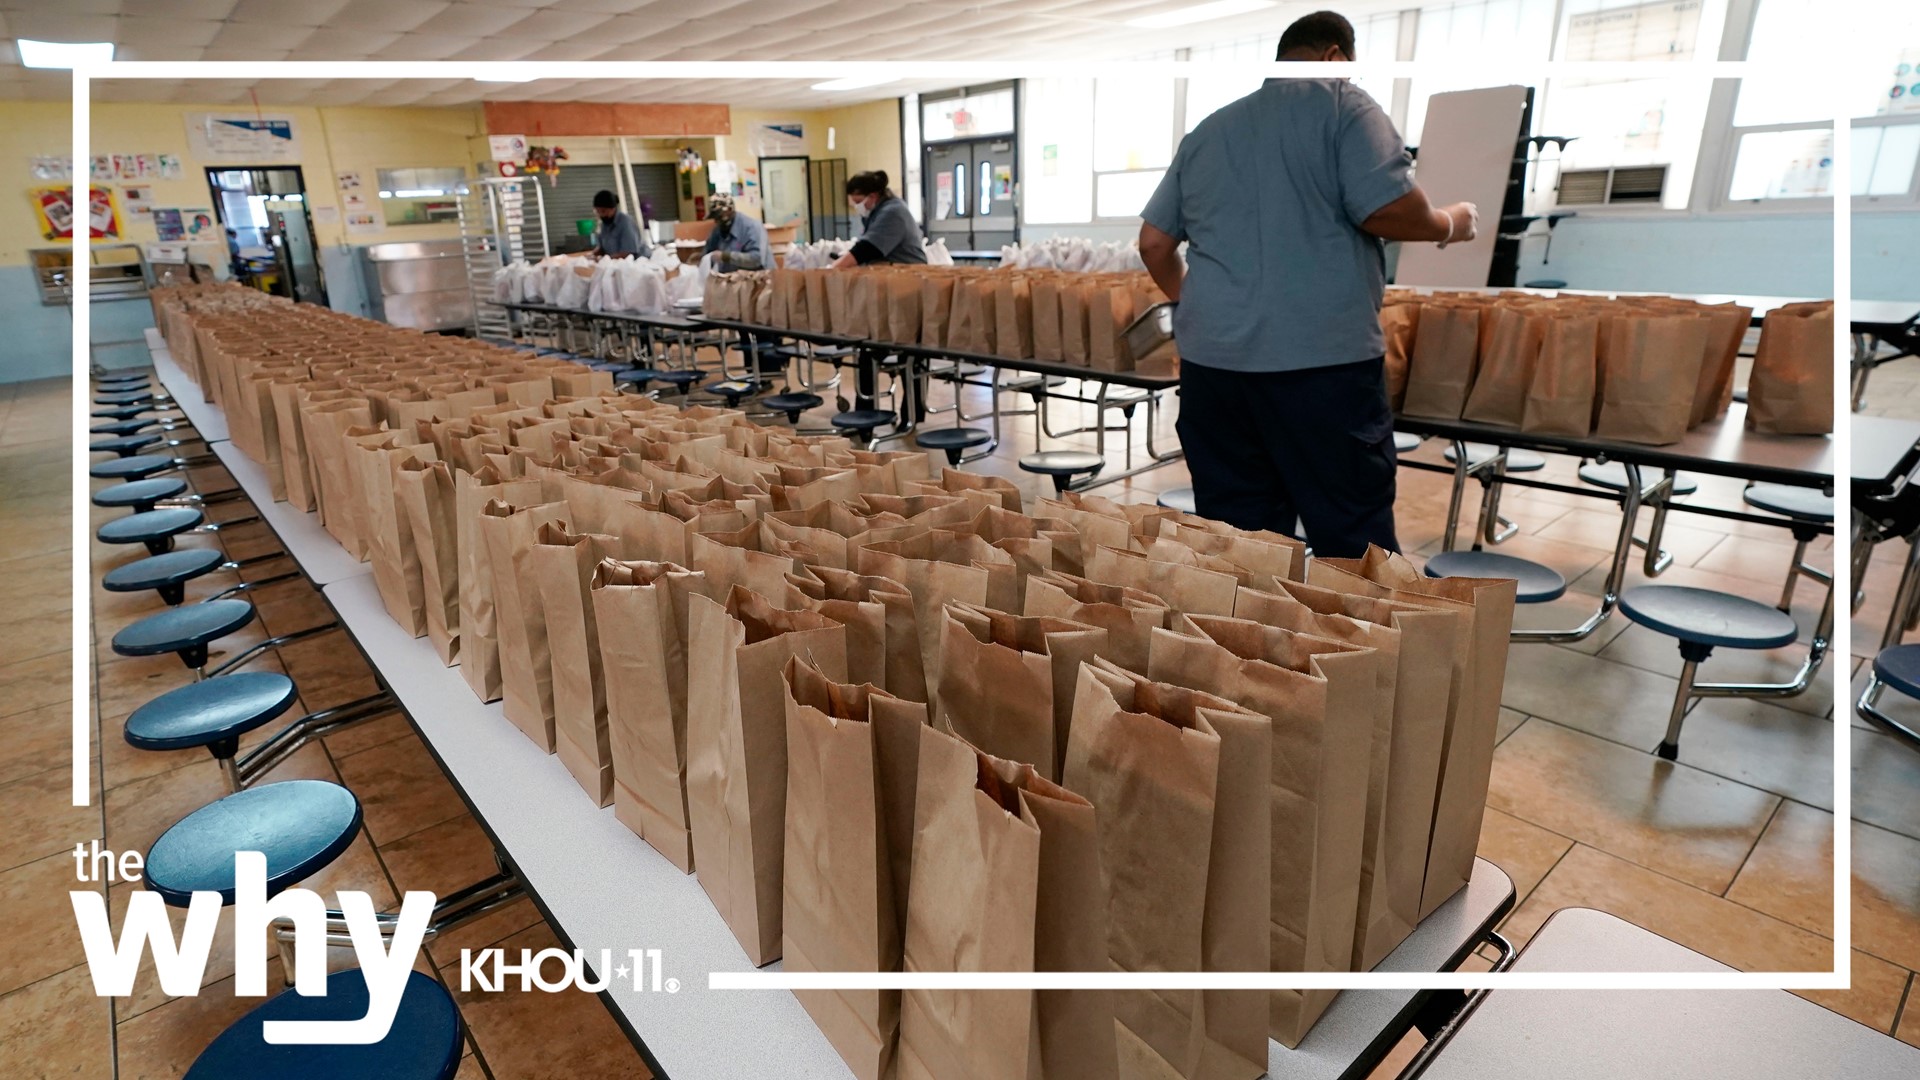 As a federal program ends, the HISD free summer meal program continues.